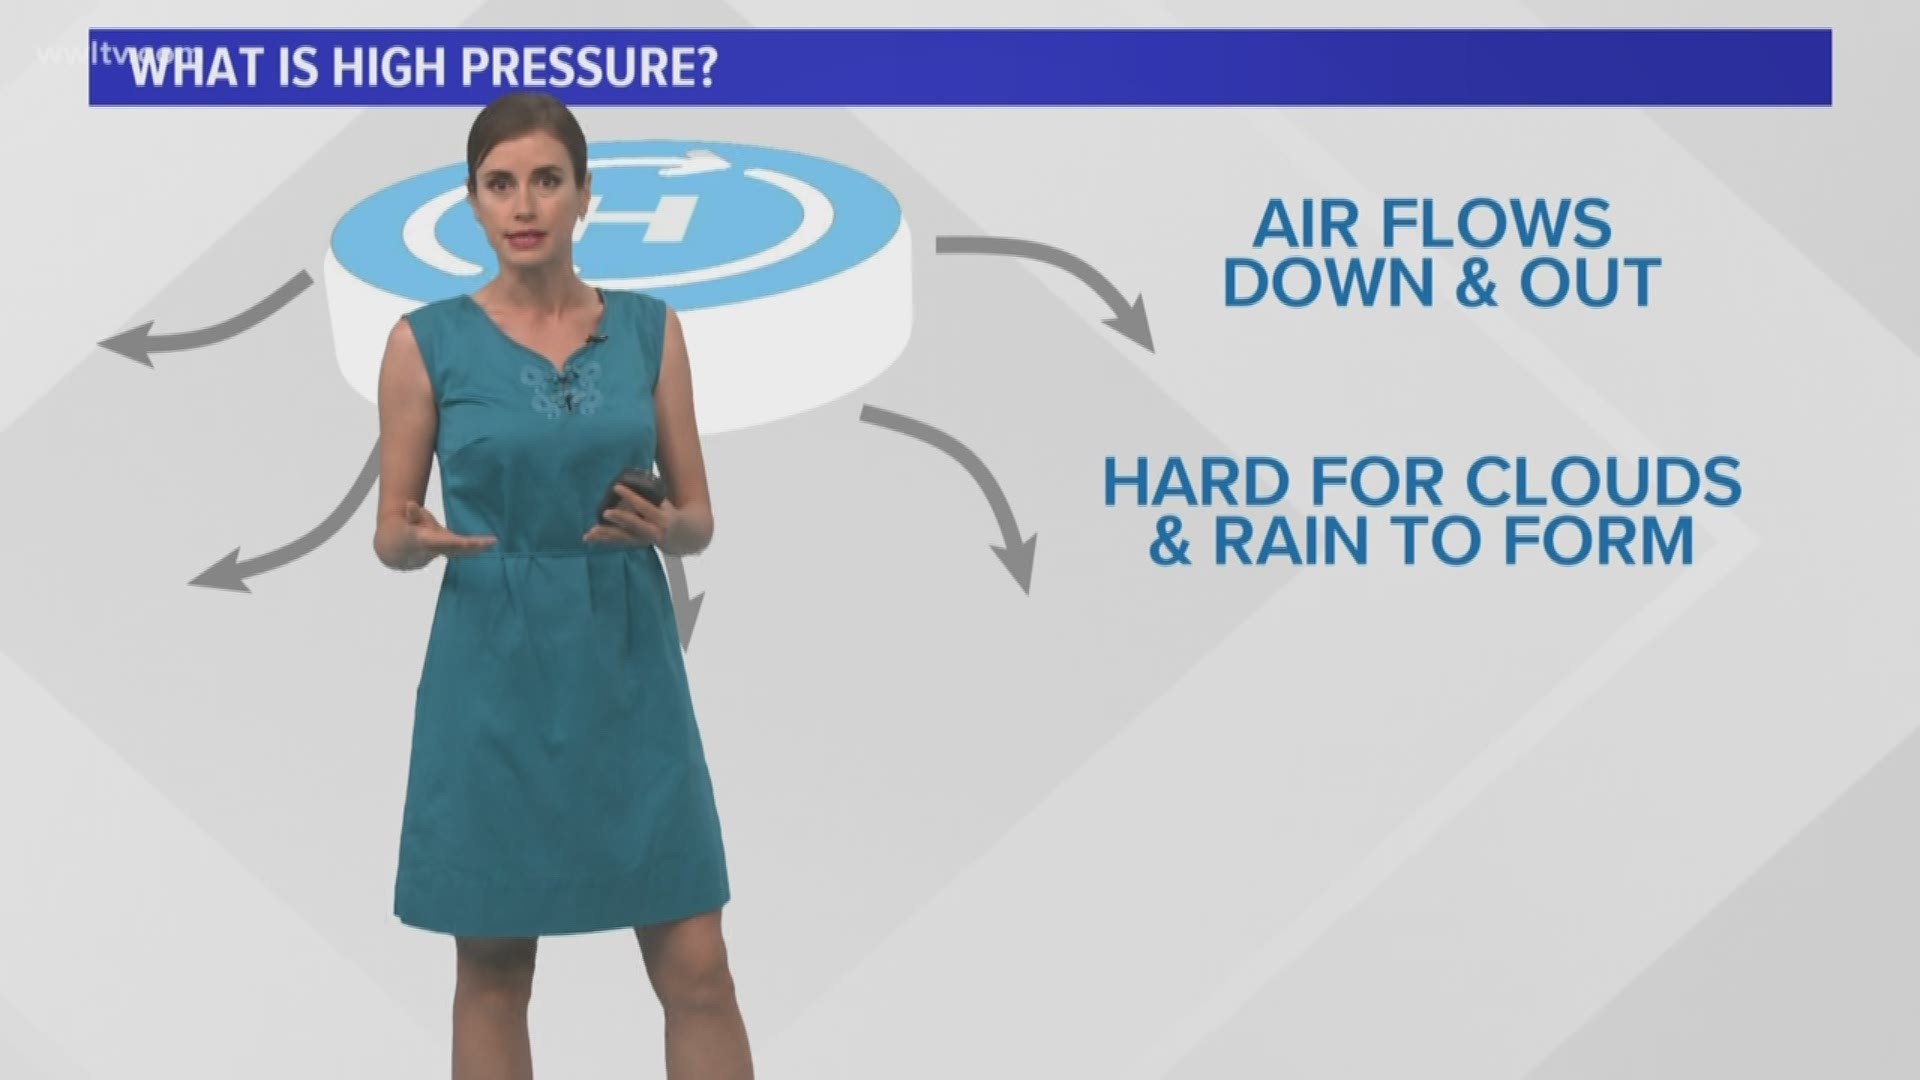 Meteorologist Alexandra Cranford has the forecast at 10 p.m. on Sunday, May 19, 2019.